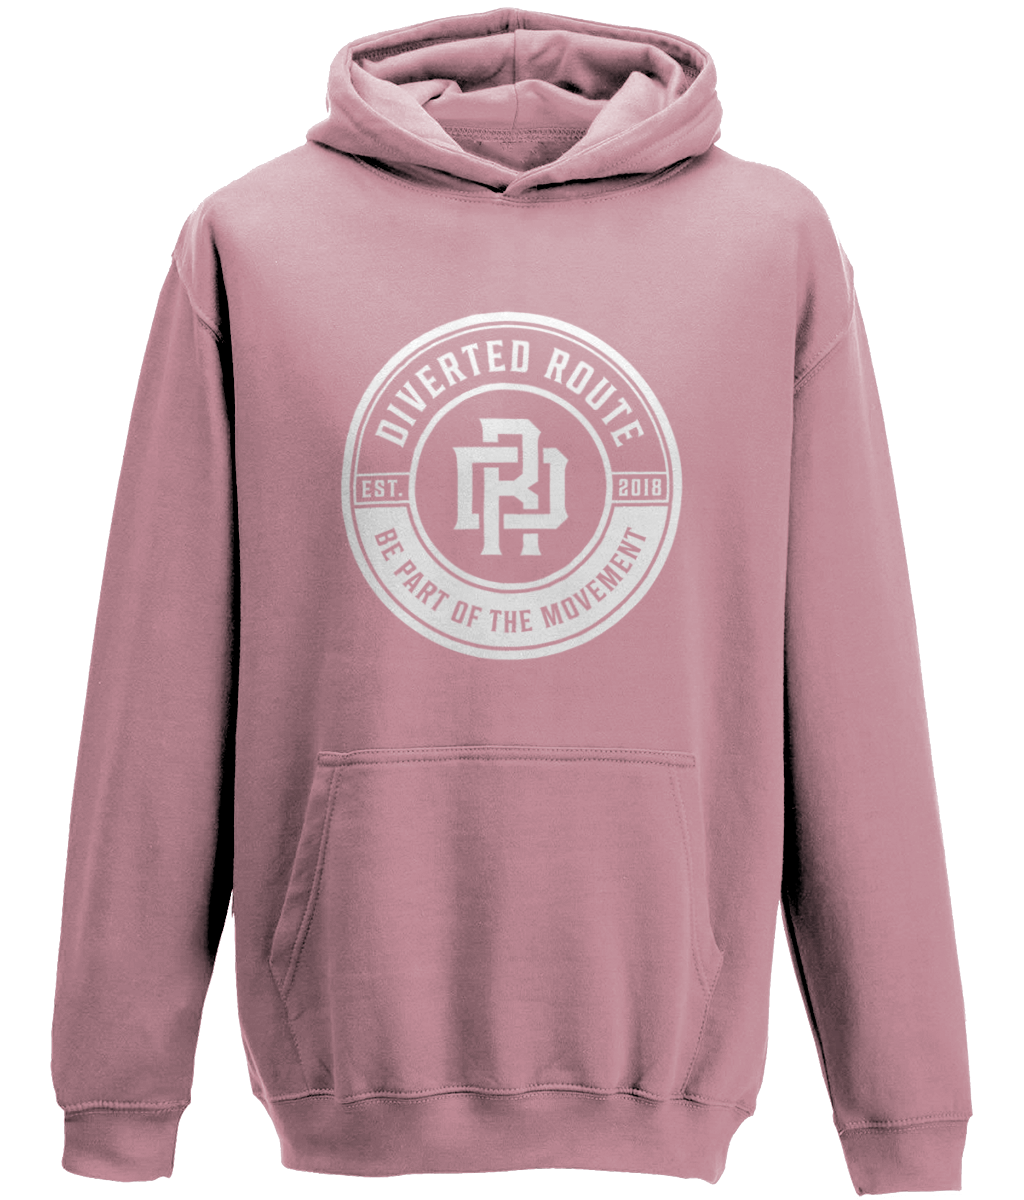 Diverted Route Unisex Adult Re Route Hoody